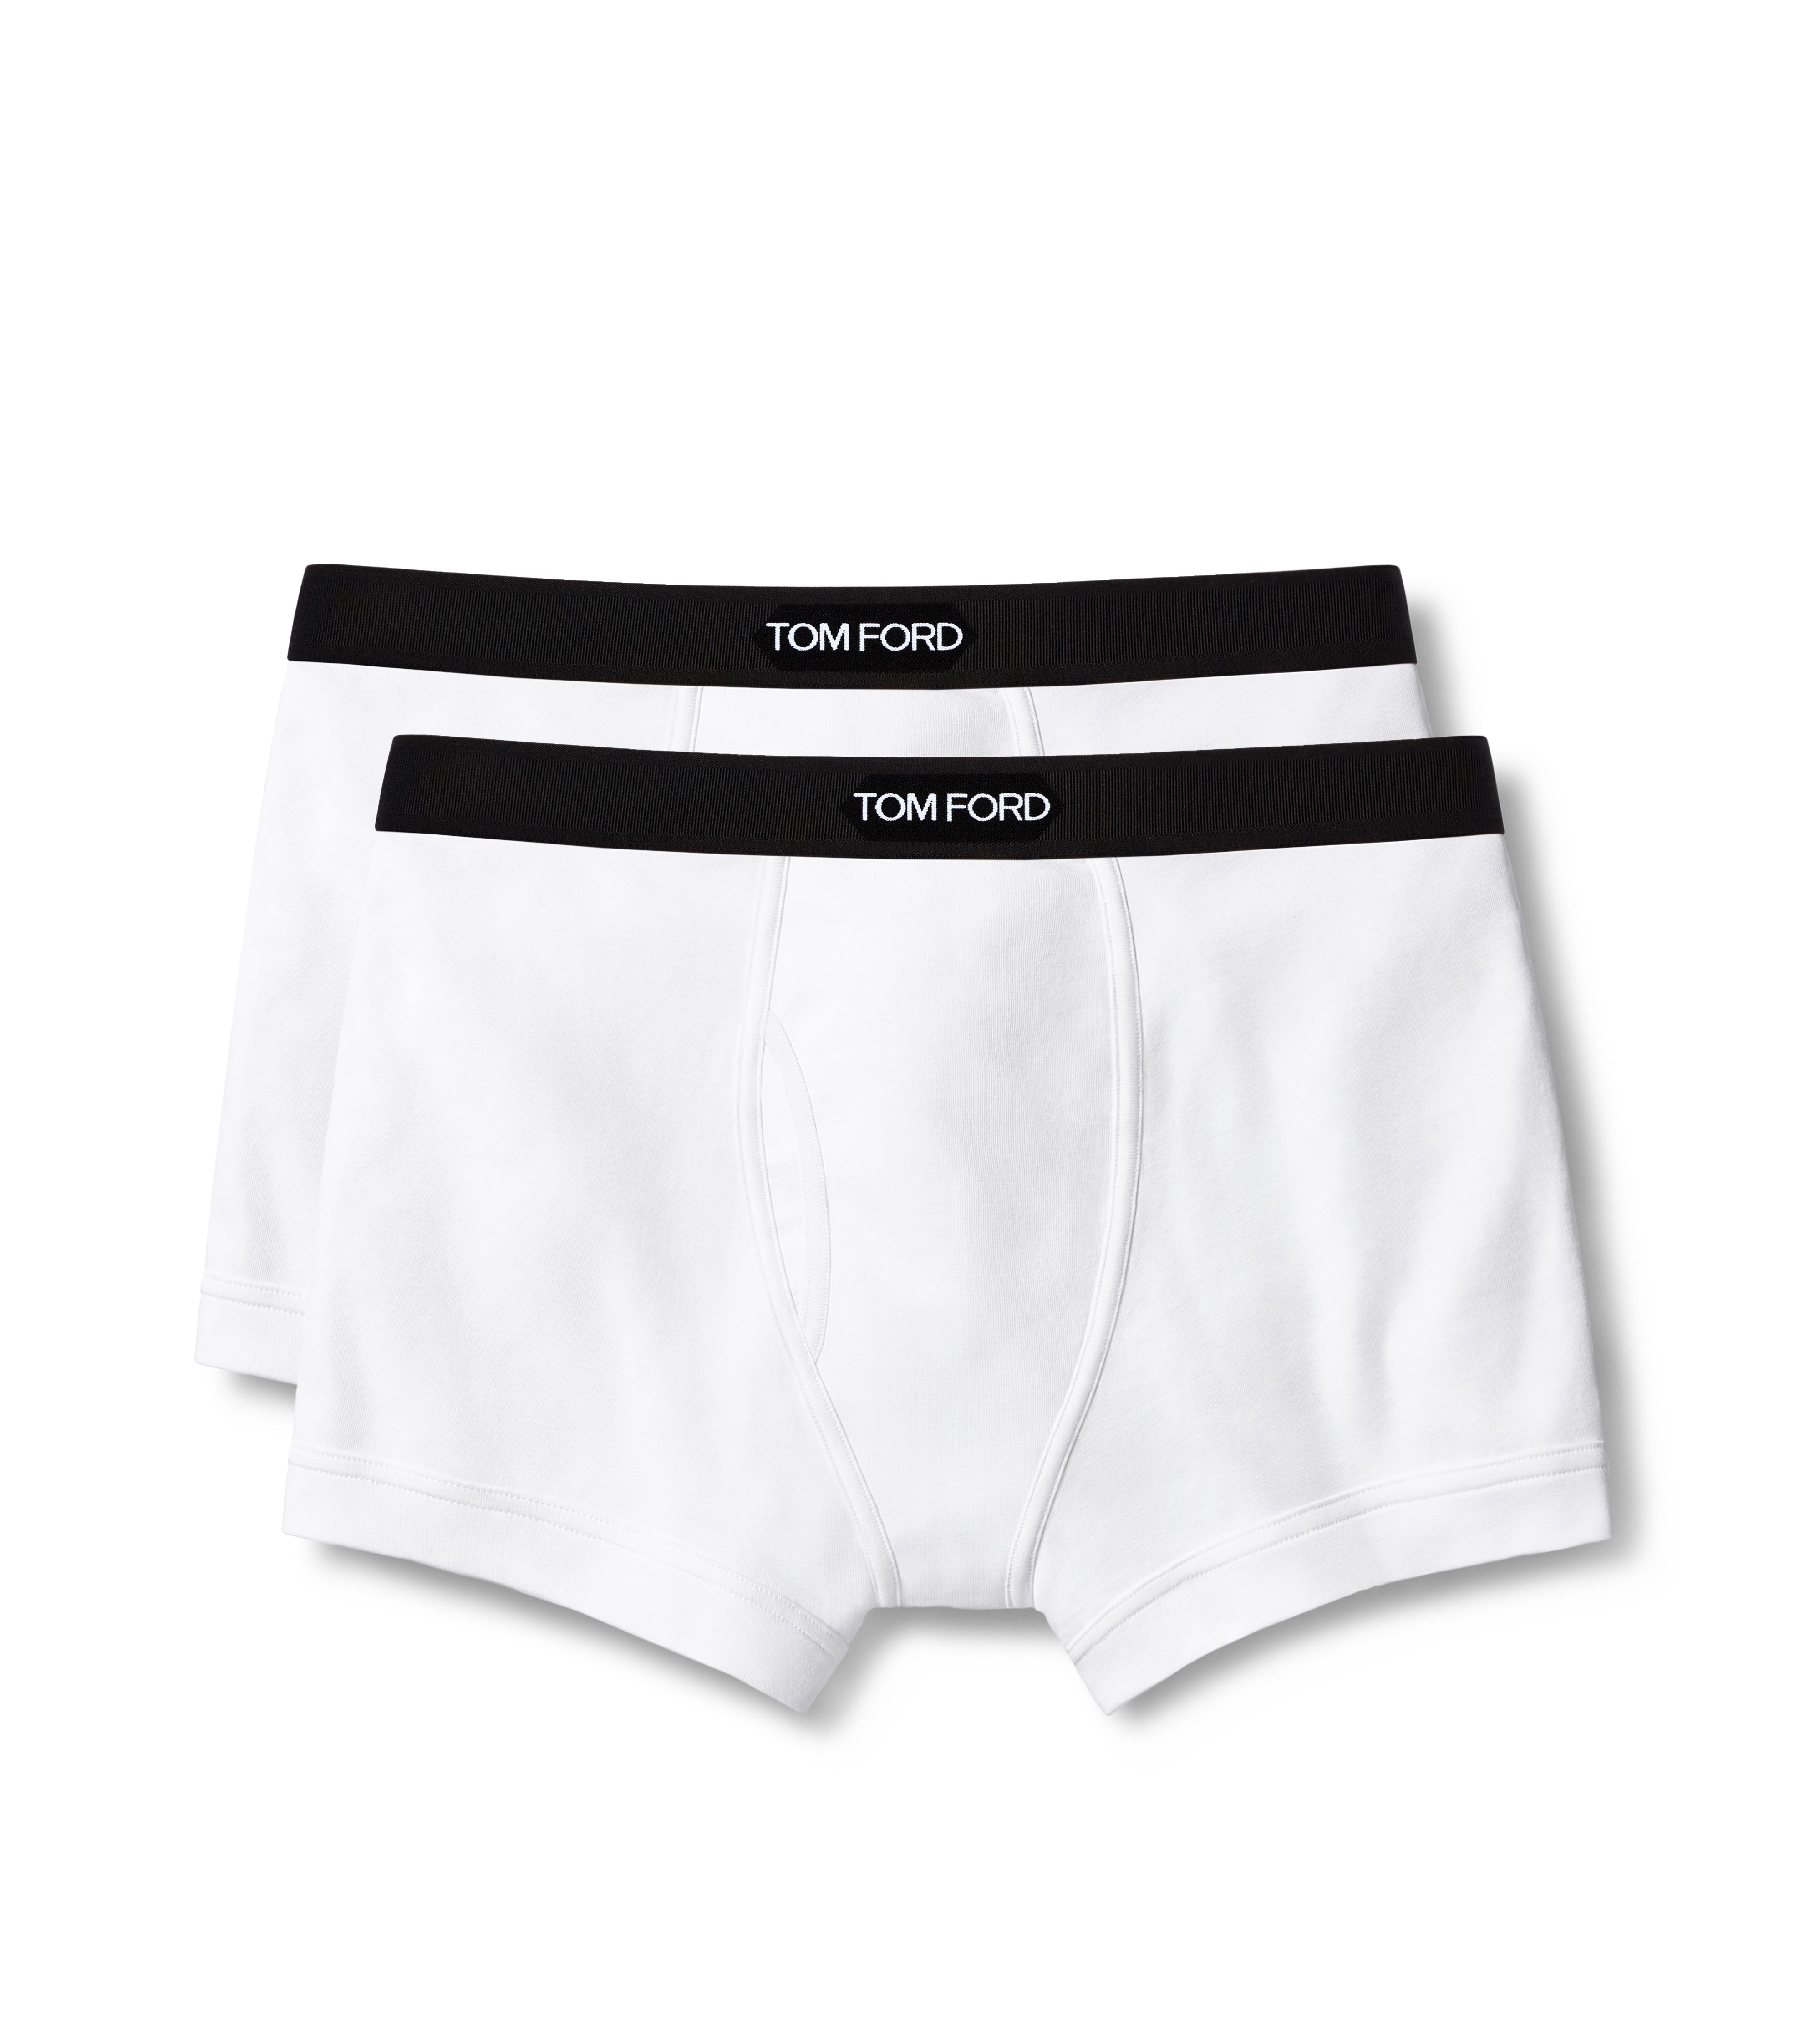 Tom Ford COTTON BOXER BRIEFS TWO PACK 